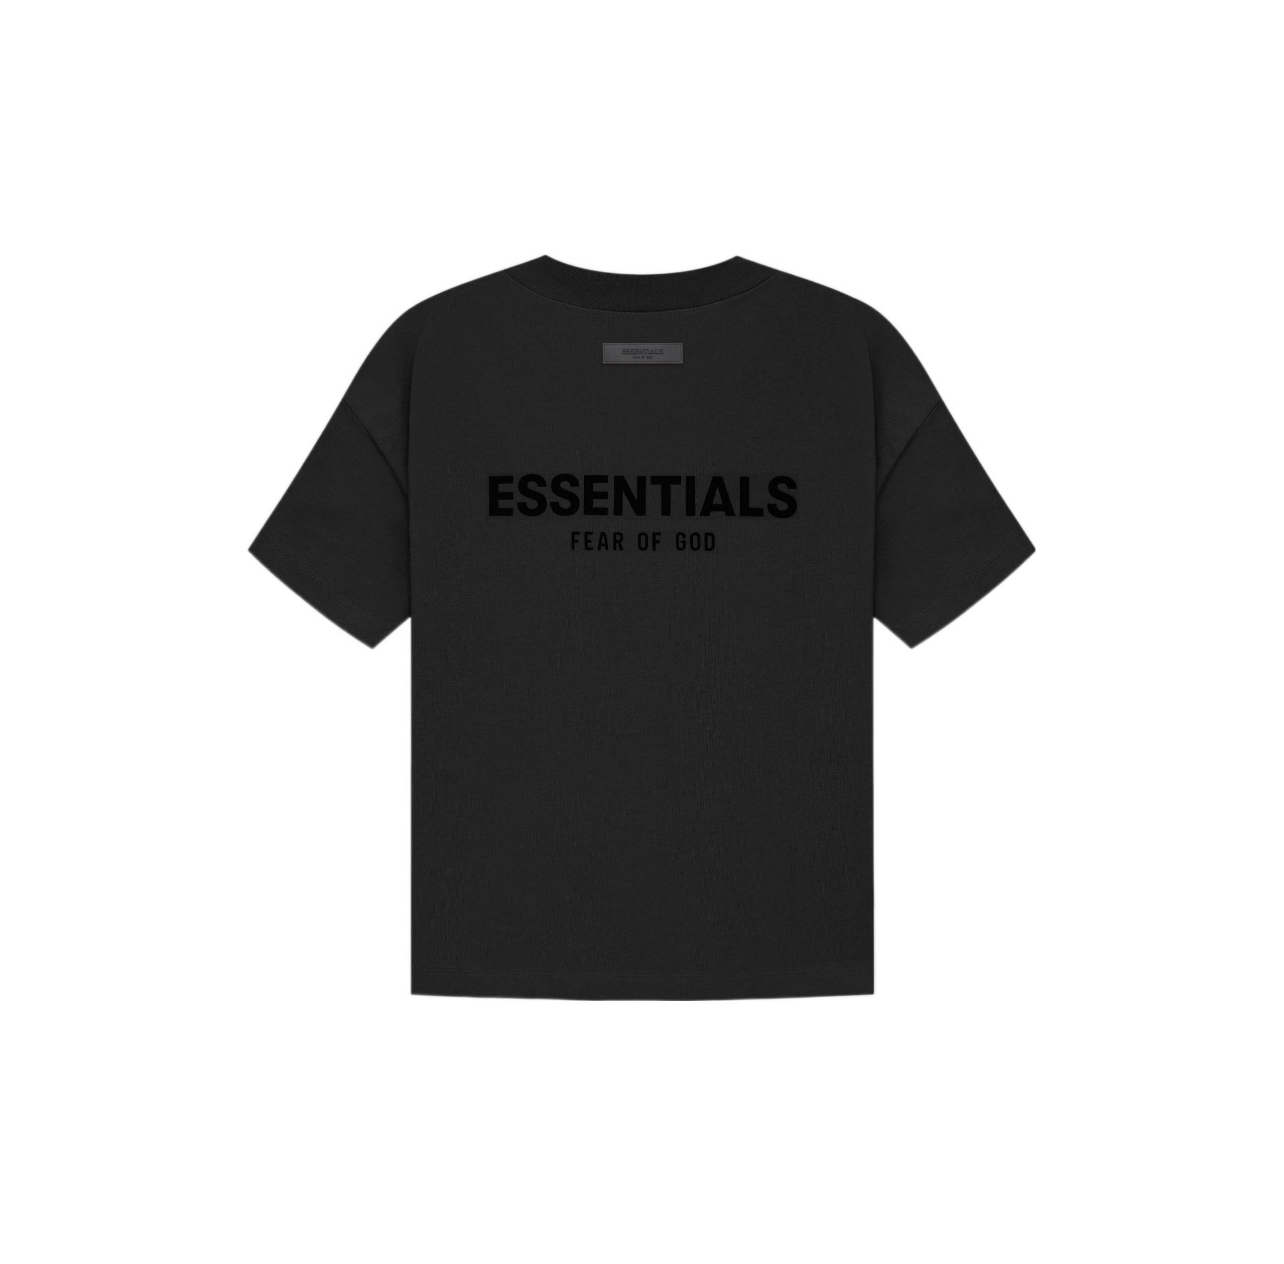 FEAR OF GOD ESSENTIALS FW22 SS22 STRETCH LIMO TEE